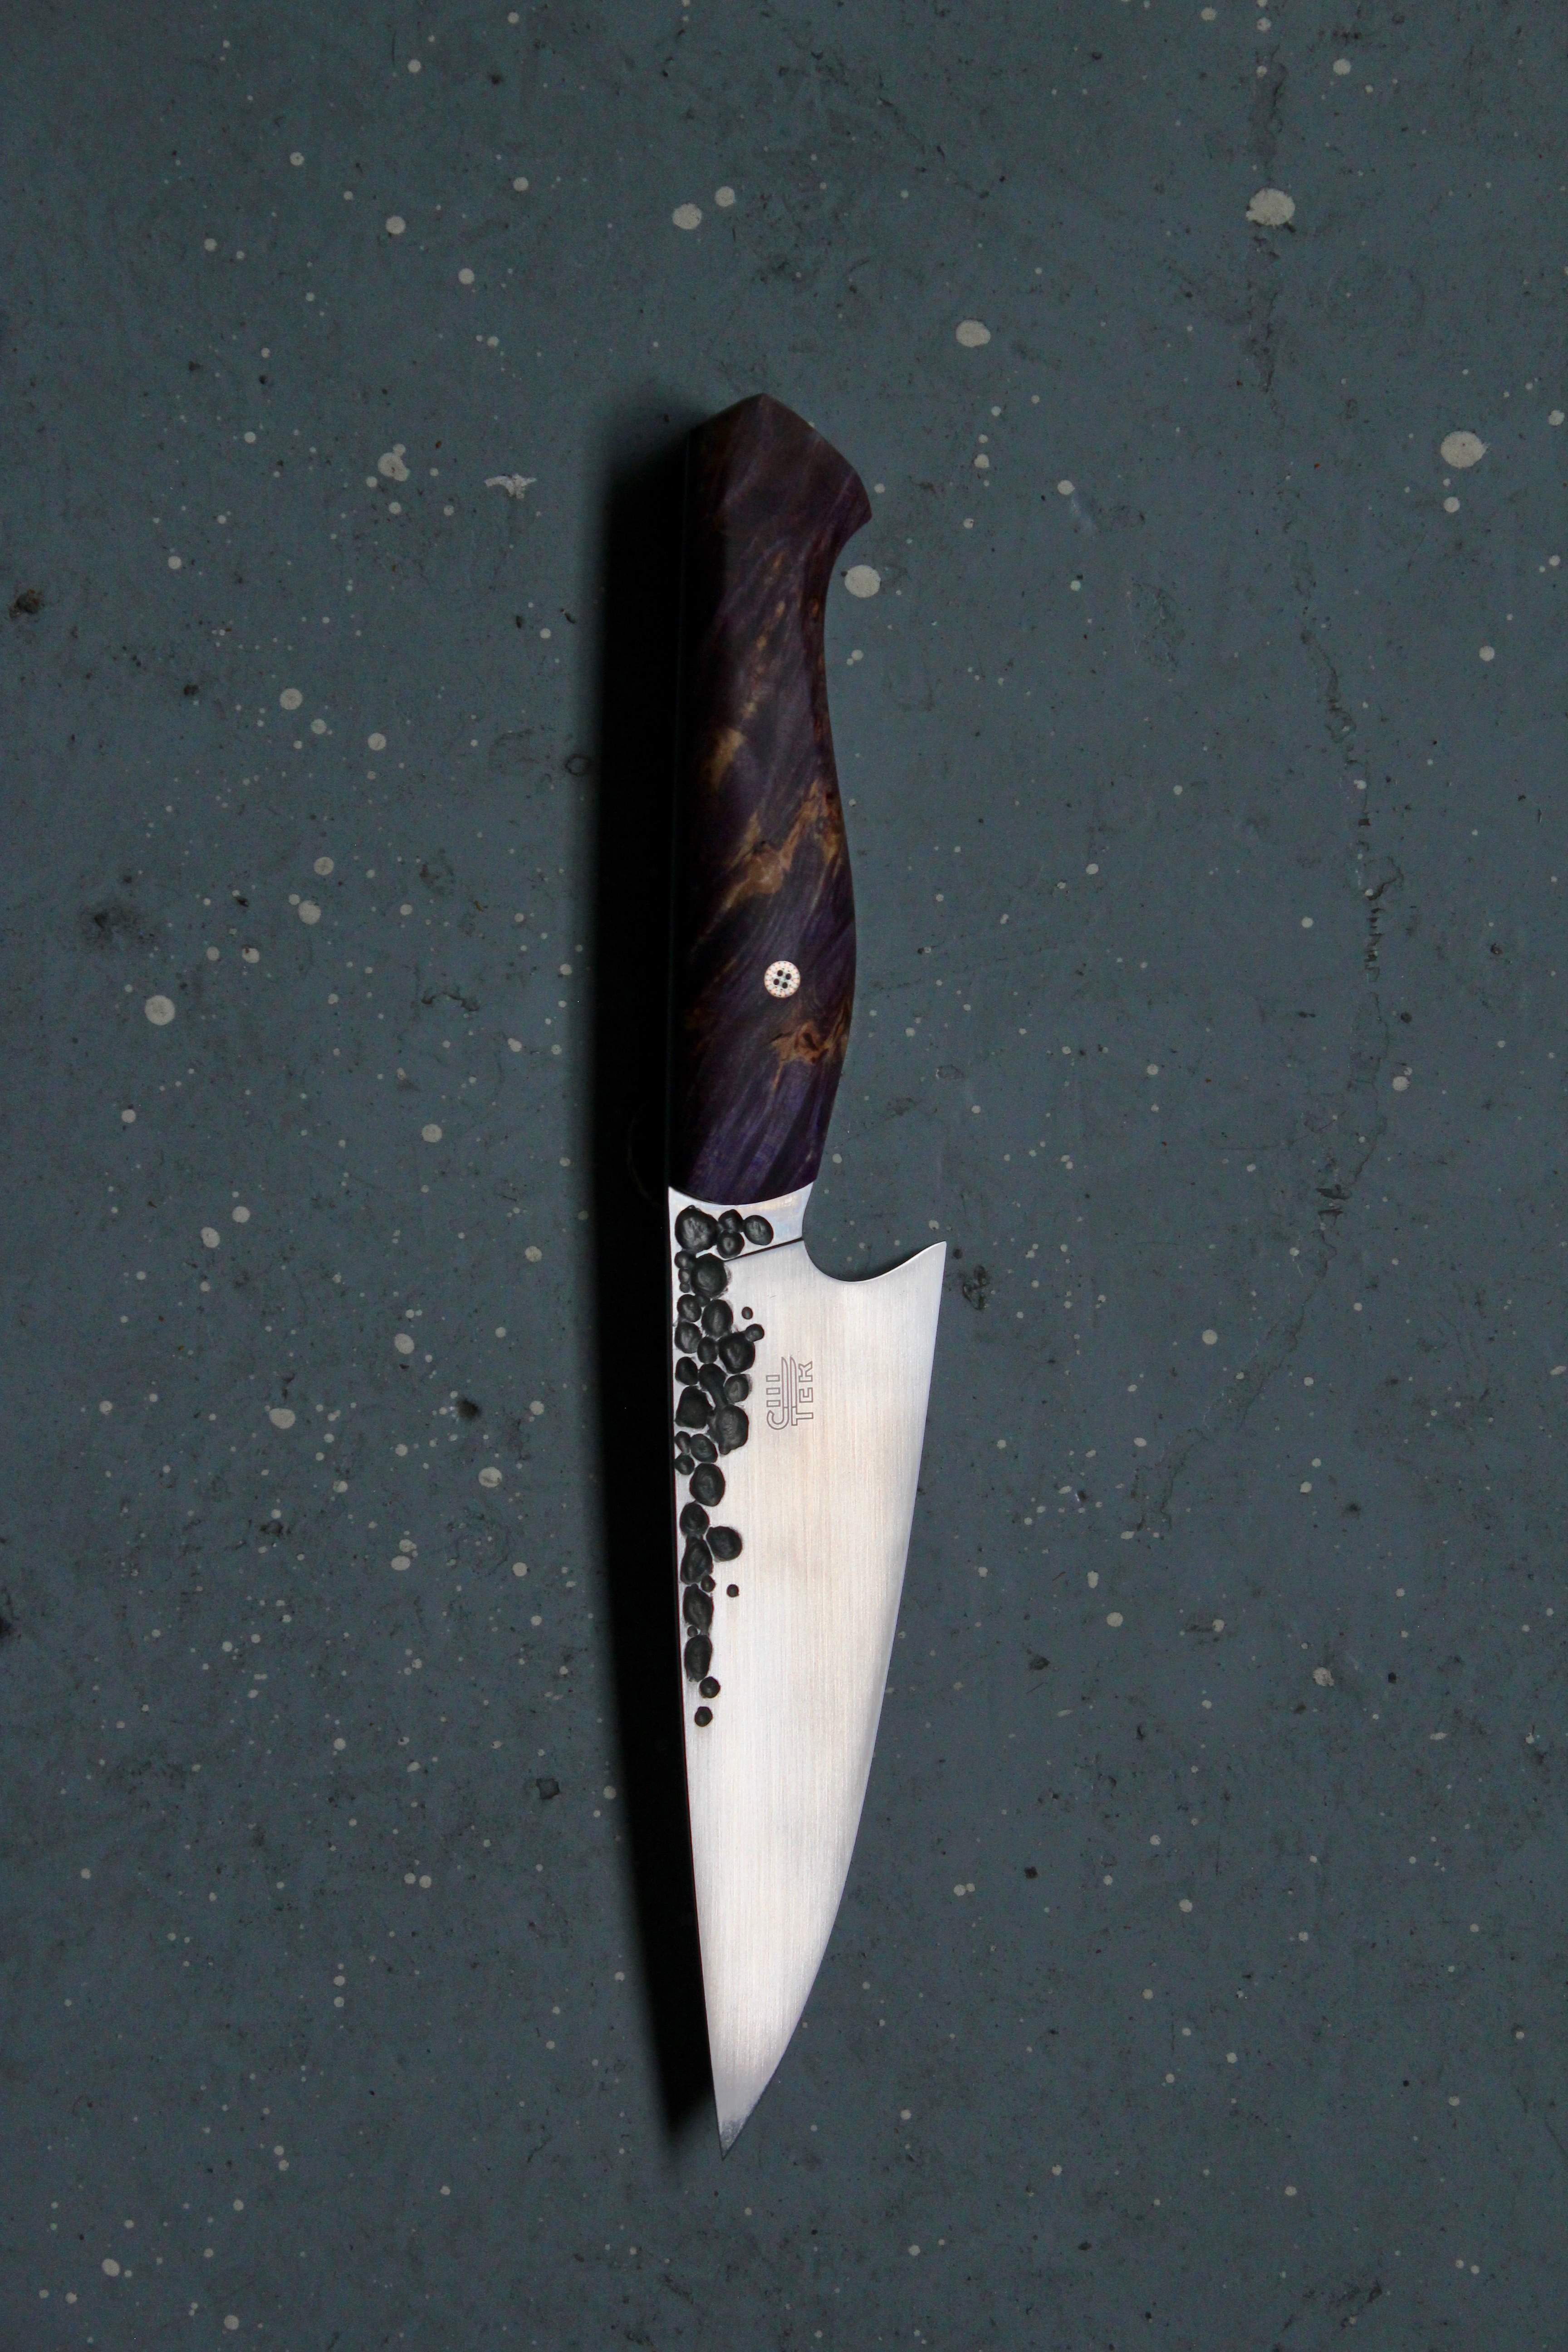 Knife from Culter in Toronto.